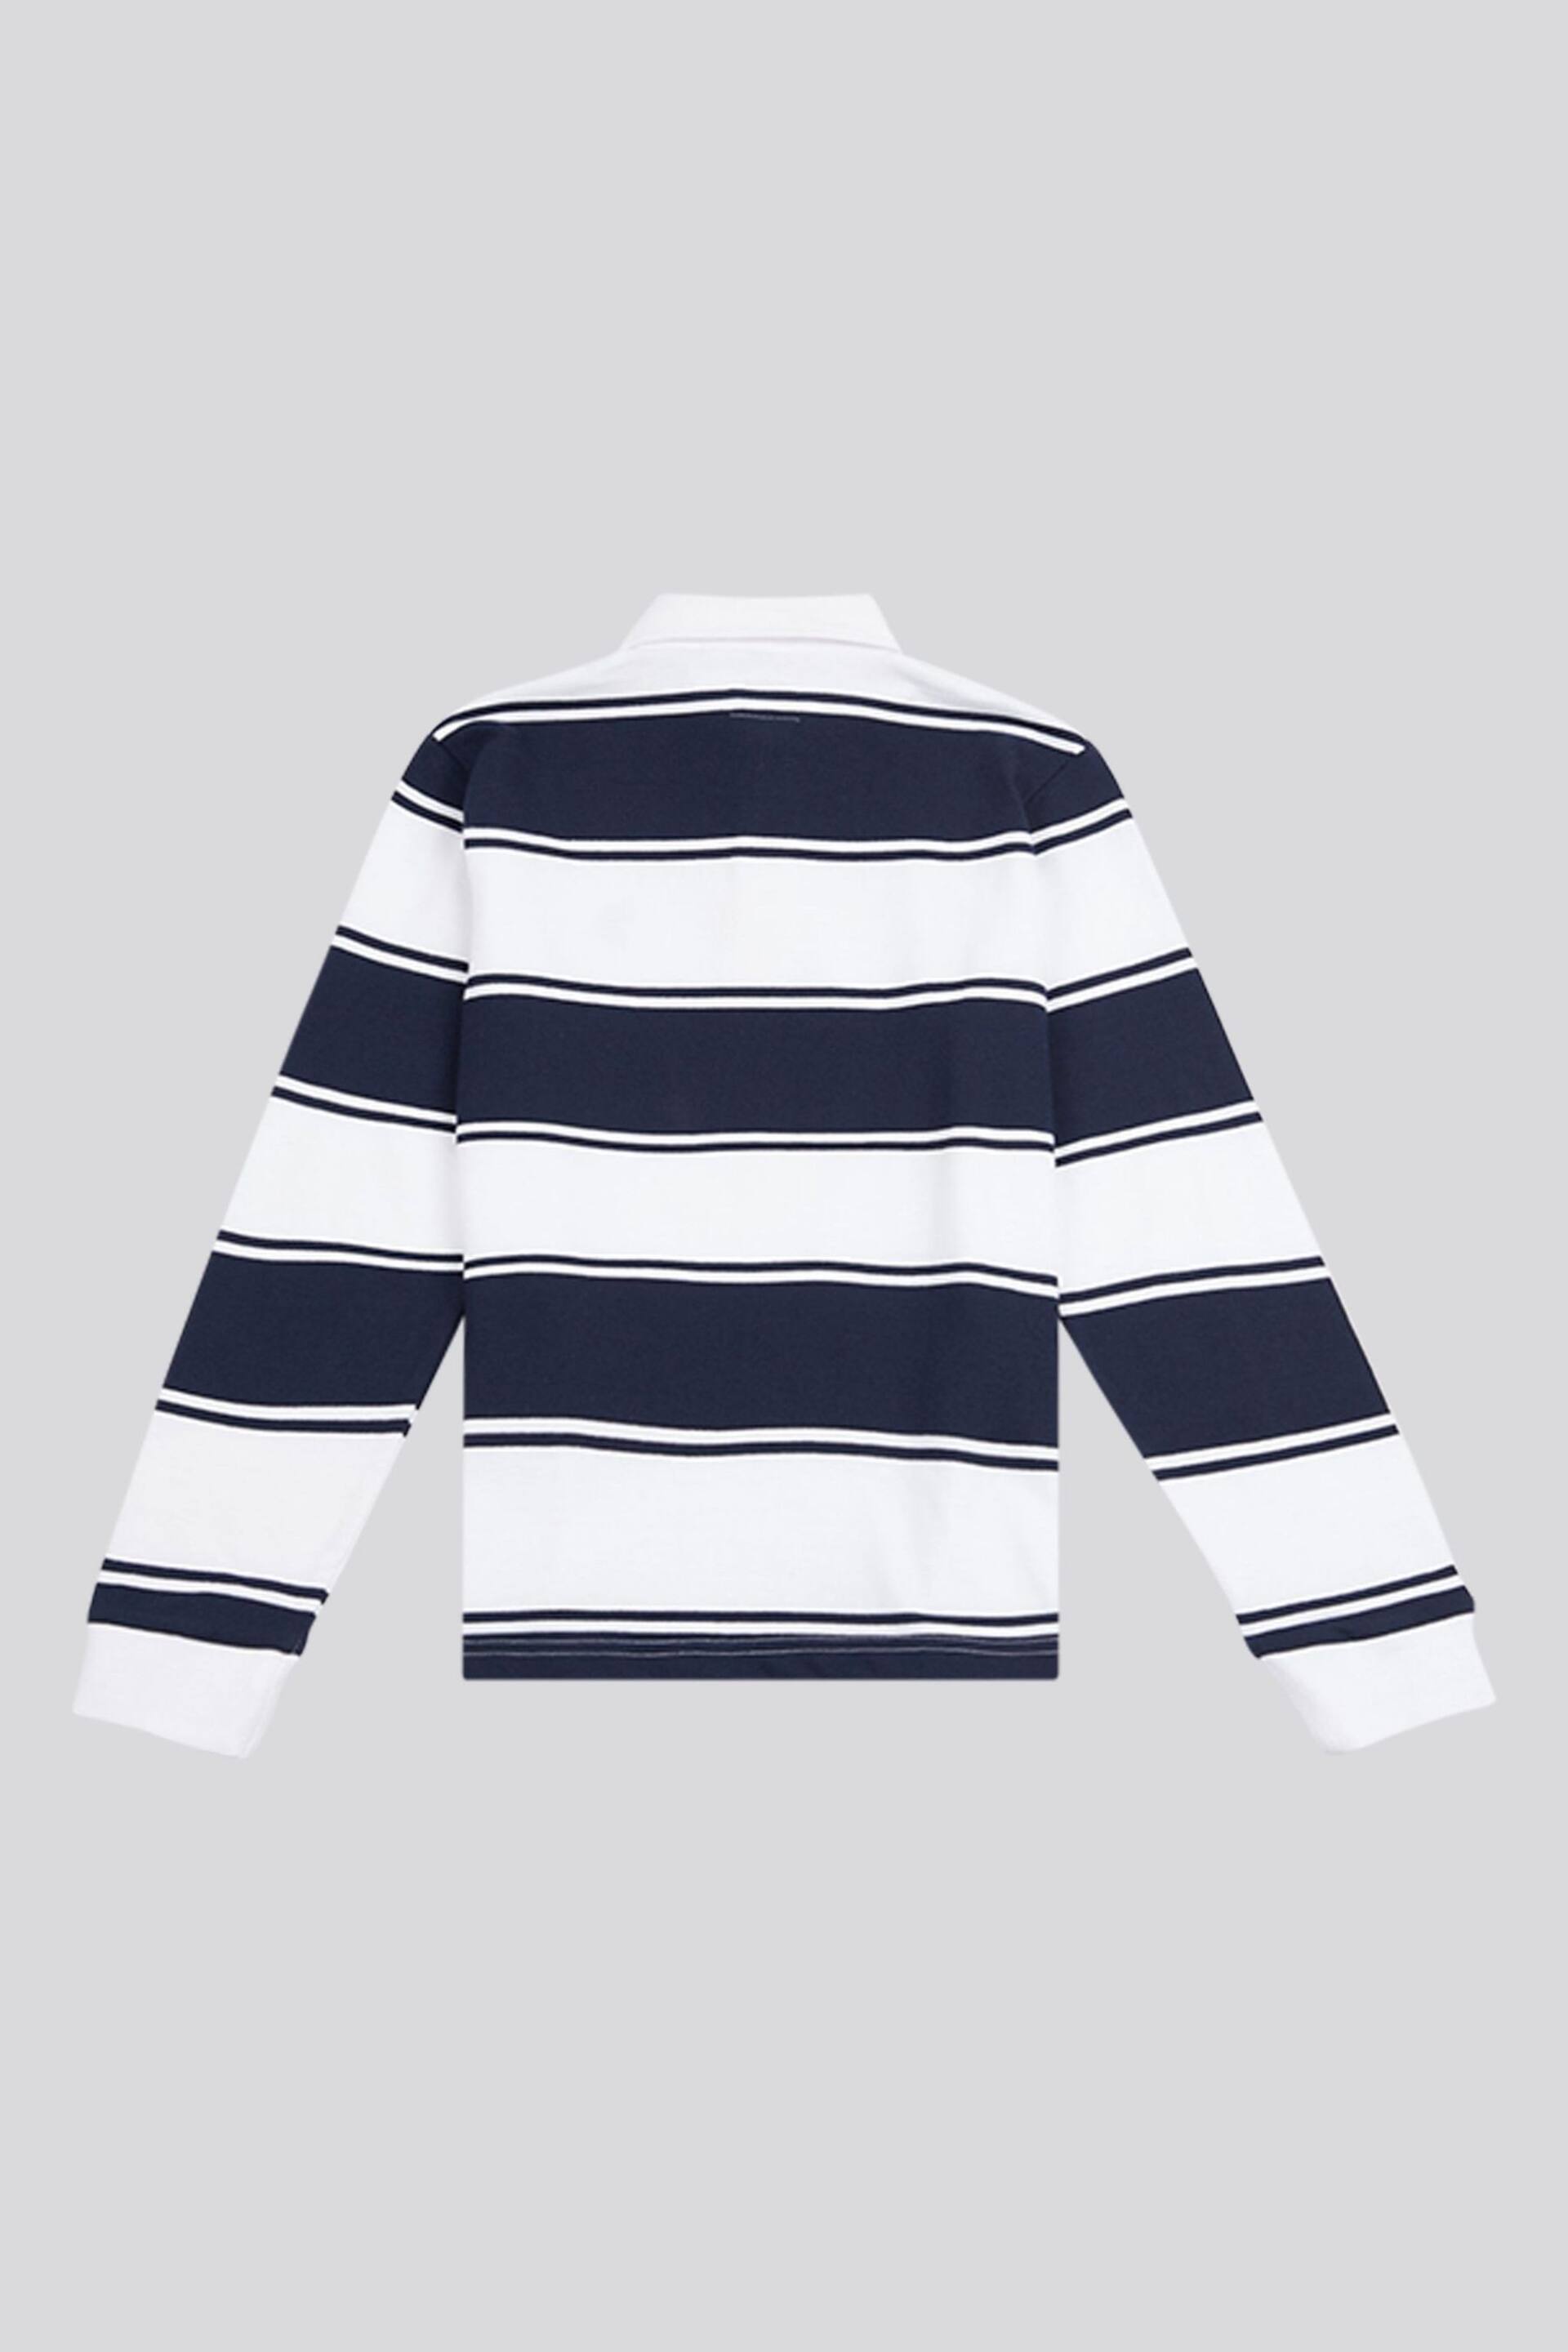 U.S. Polo Assn. Boys Striped Rugby White Shirt - Image 2 of 3